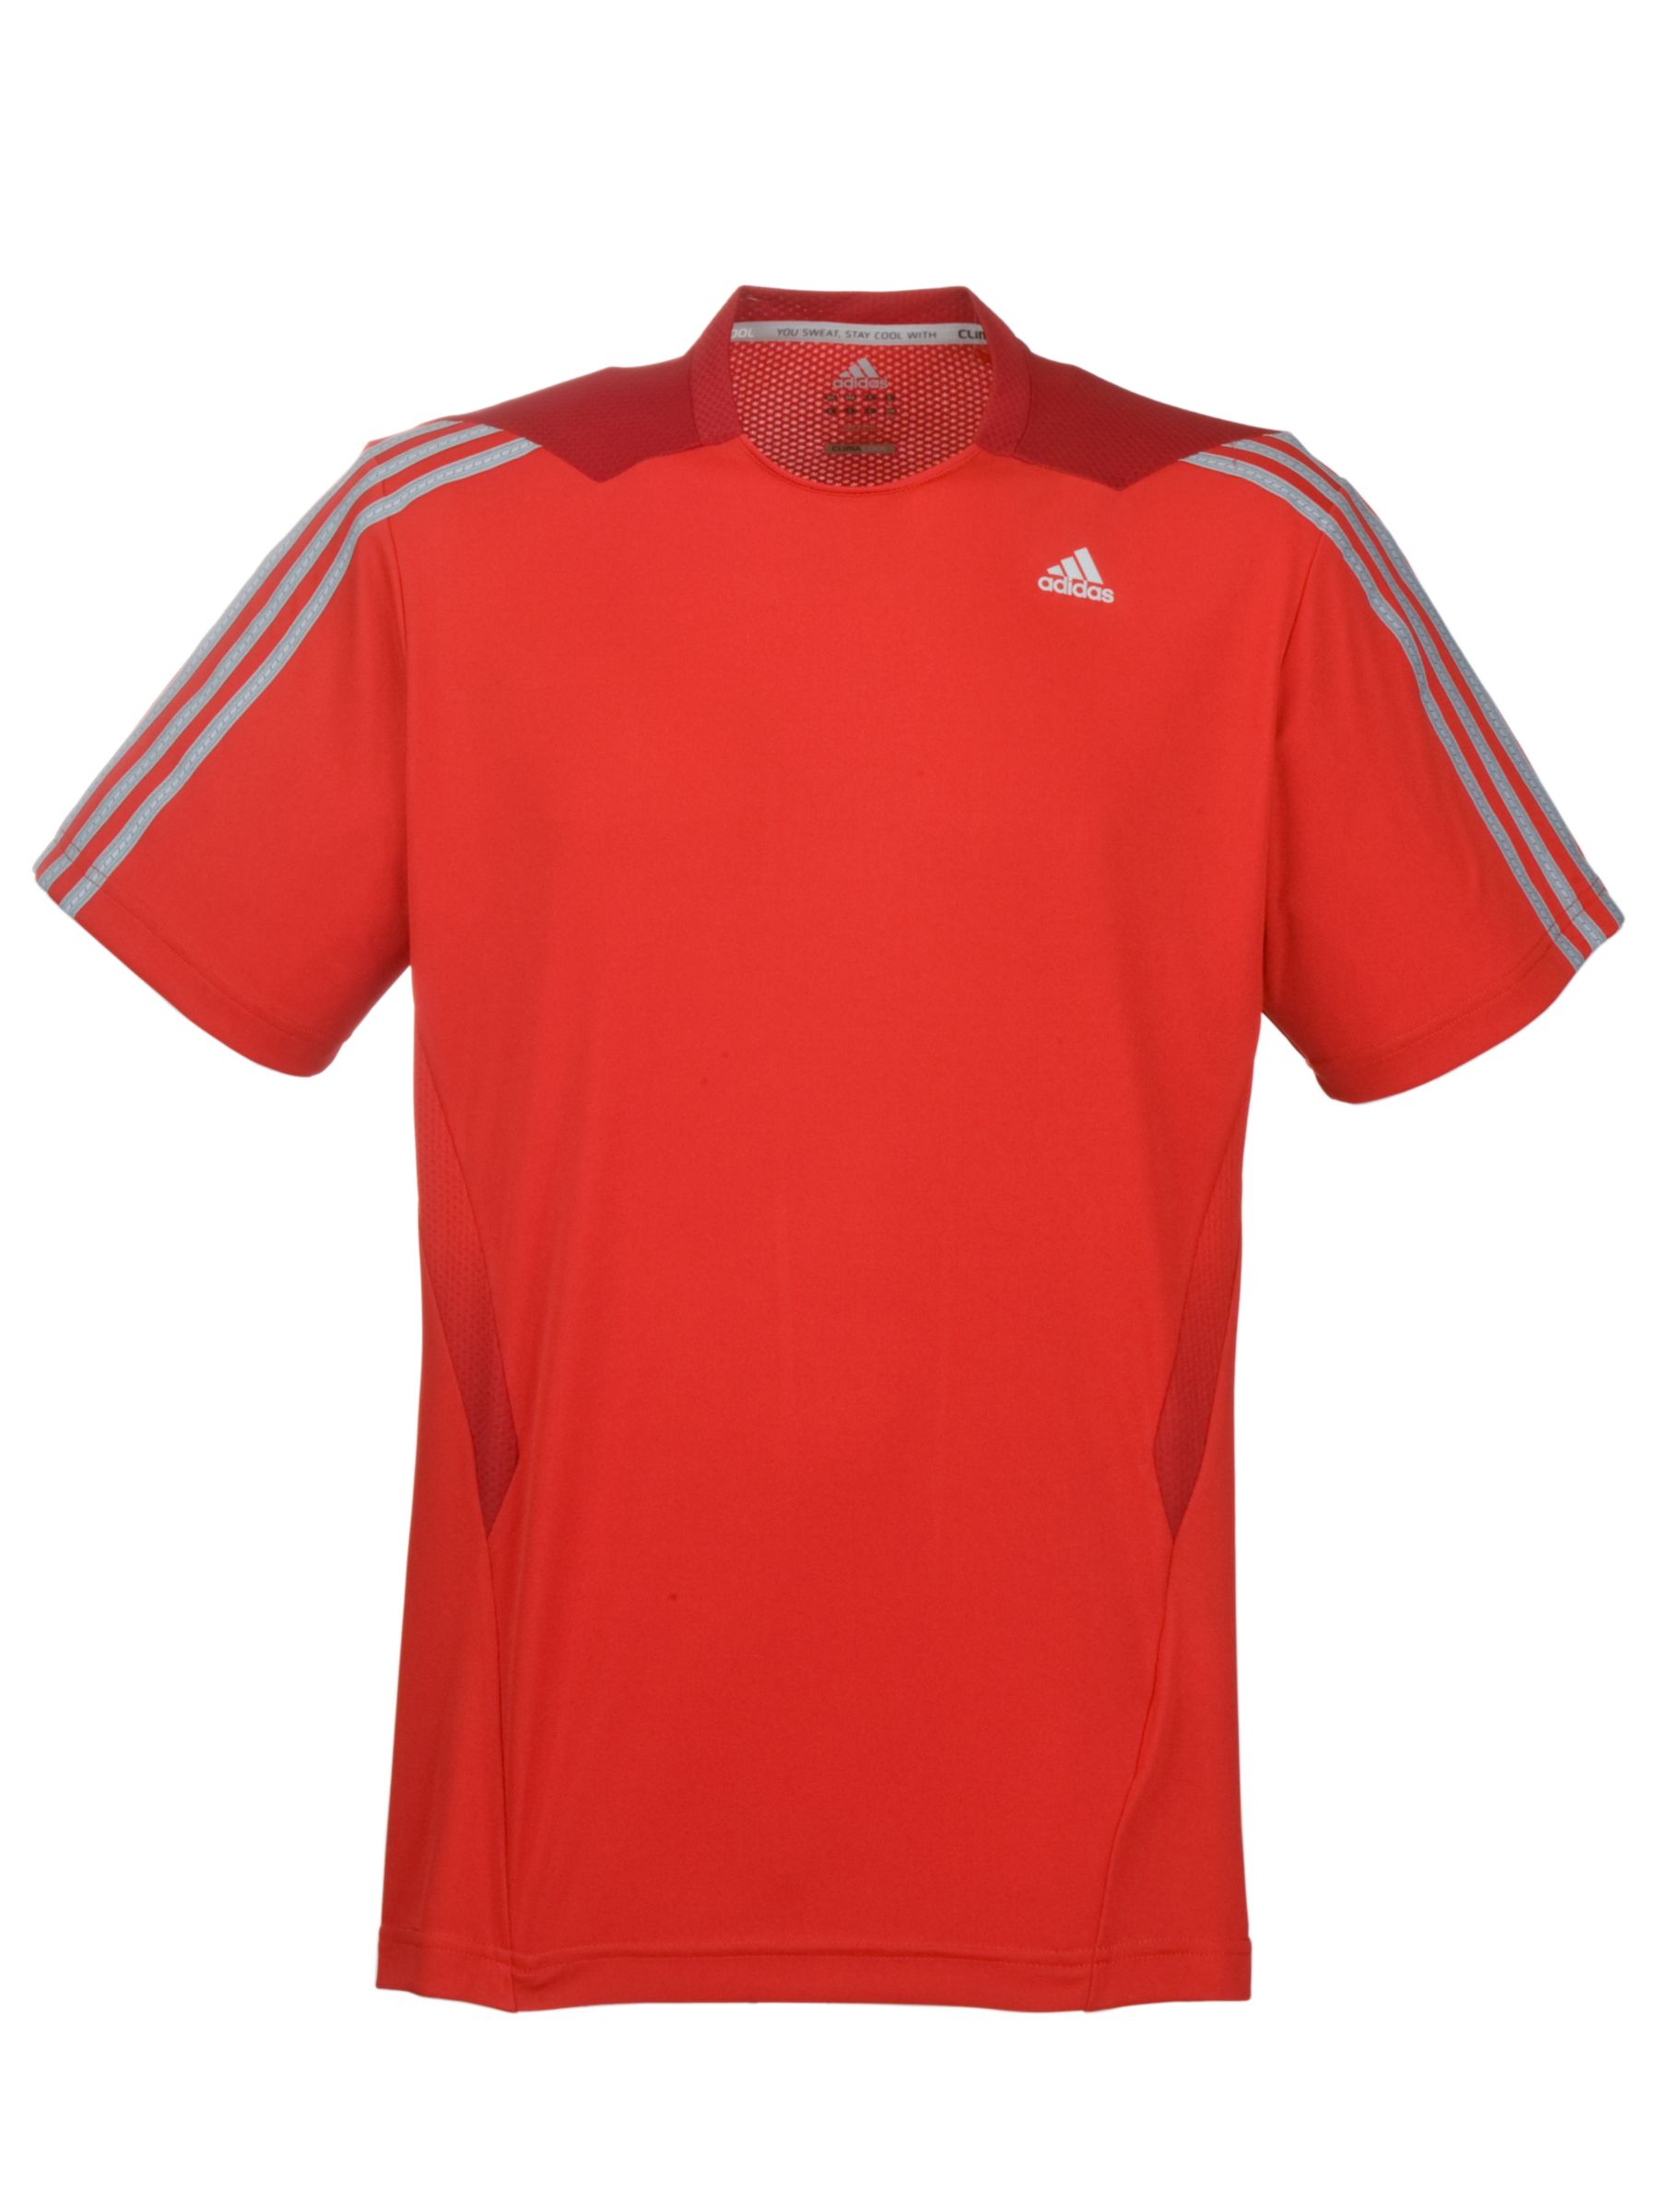 Adidas Clima365 T-Shirt, Red/Strong red